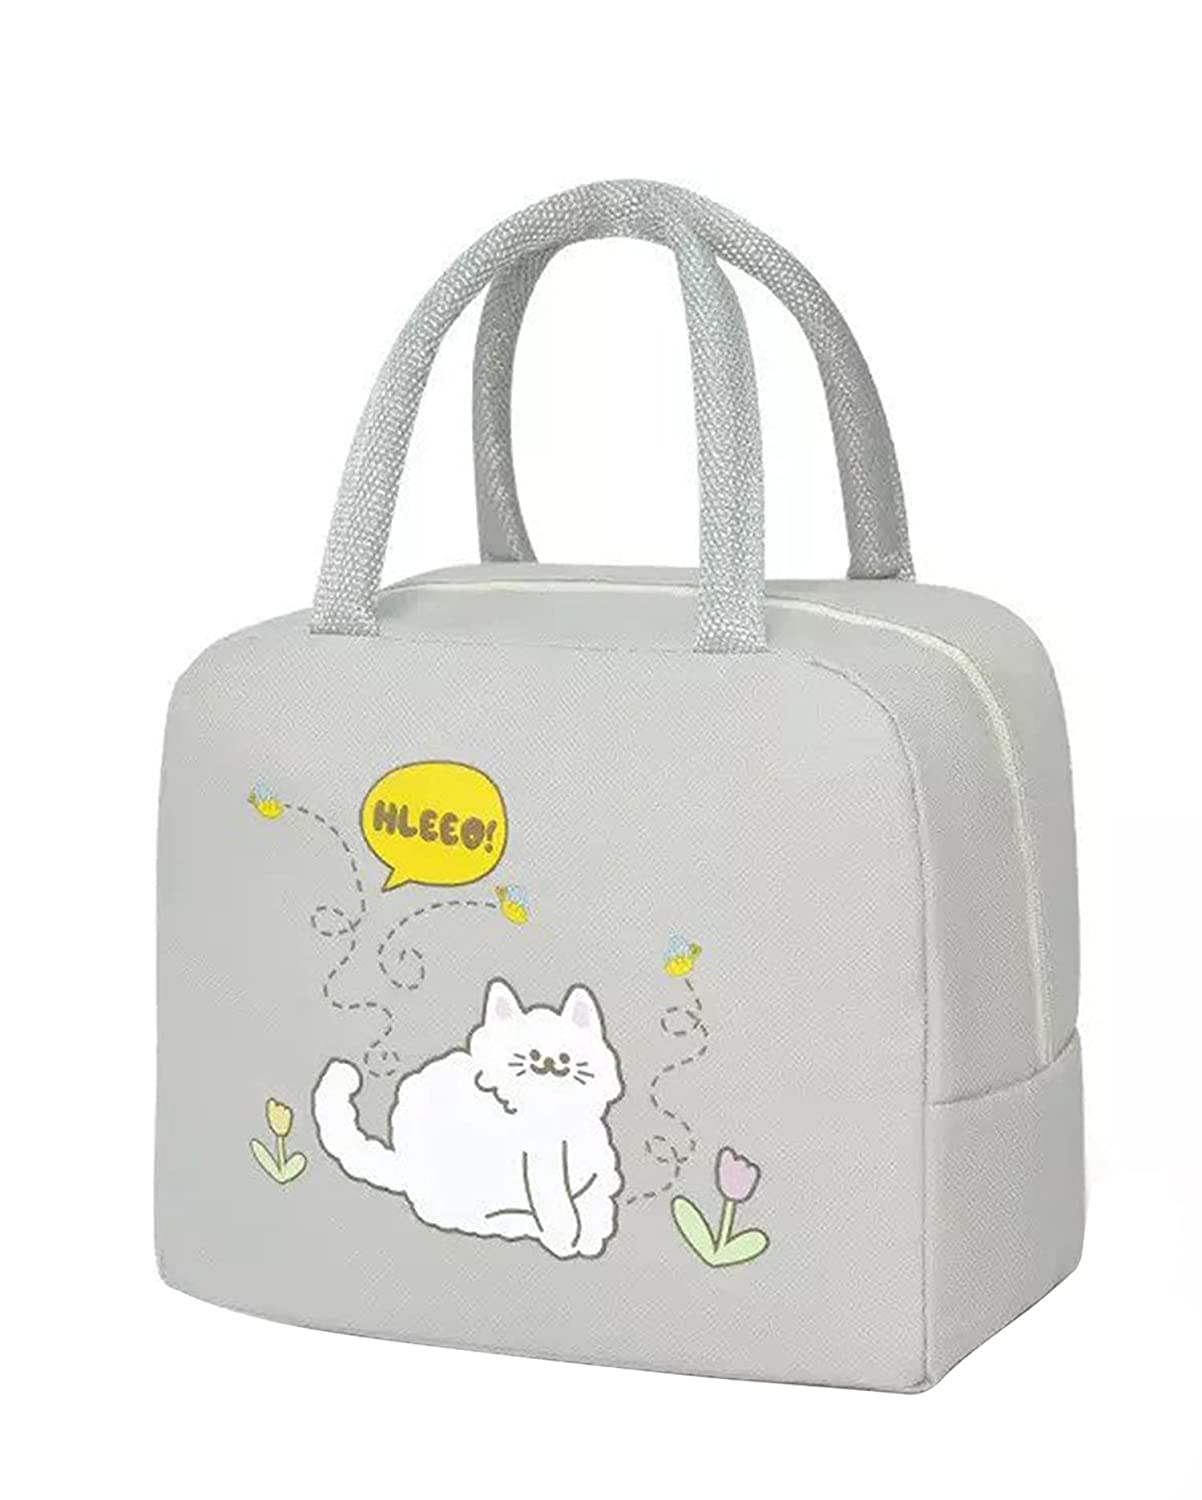 Cat Printed Insulated Reusable Lunch Bag